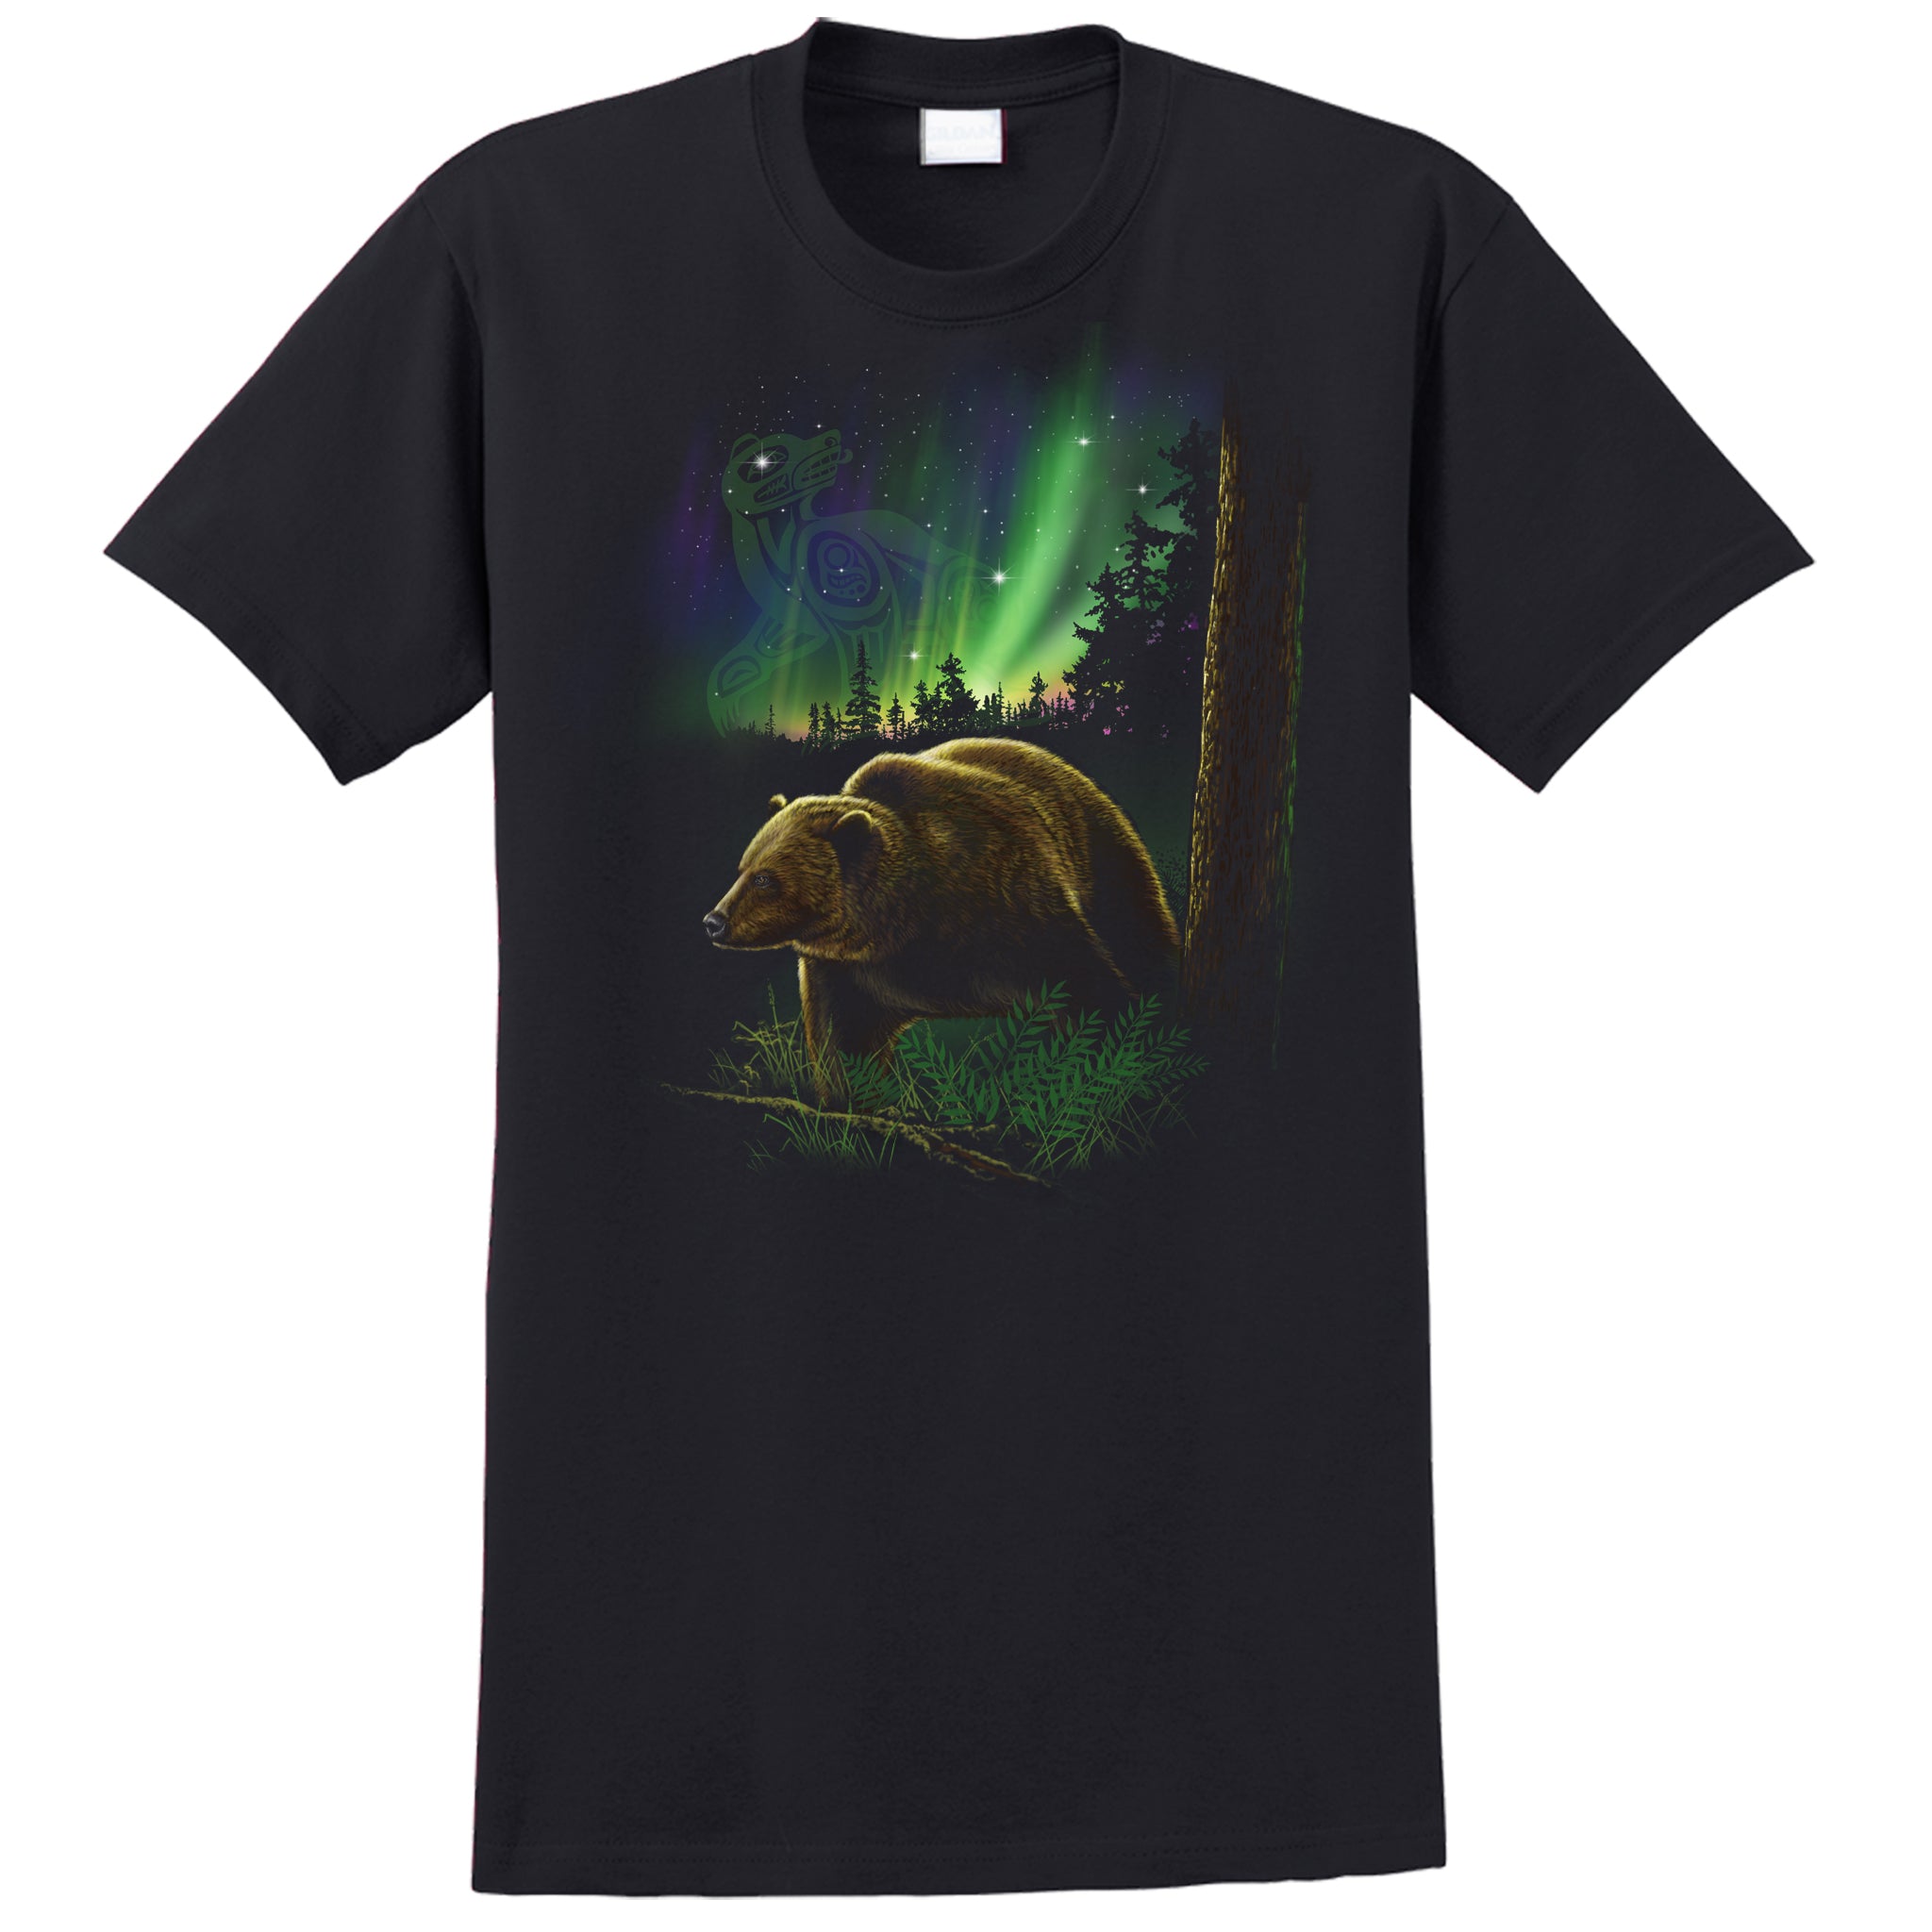 Native Grizzly Bear T-shirt - black T-shirt with grizzly bear in the woods with Northern Lights and native symbol by Canadian artist Eric Blais